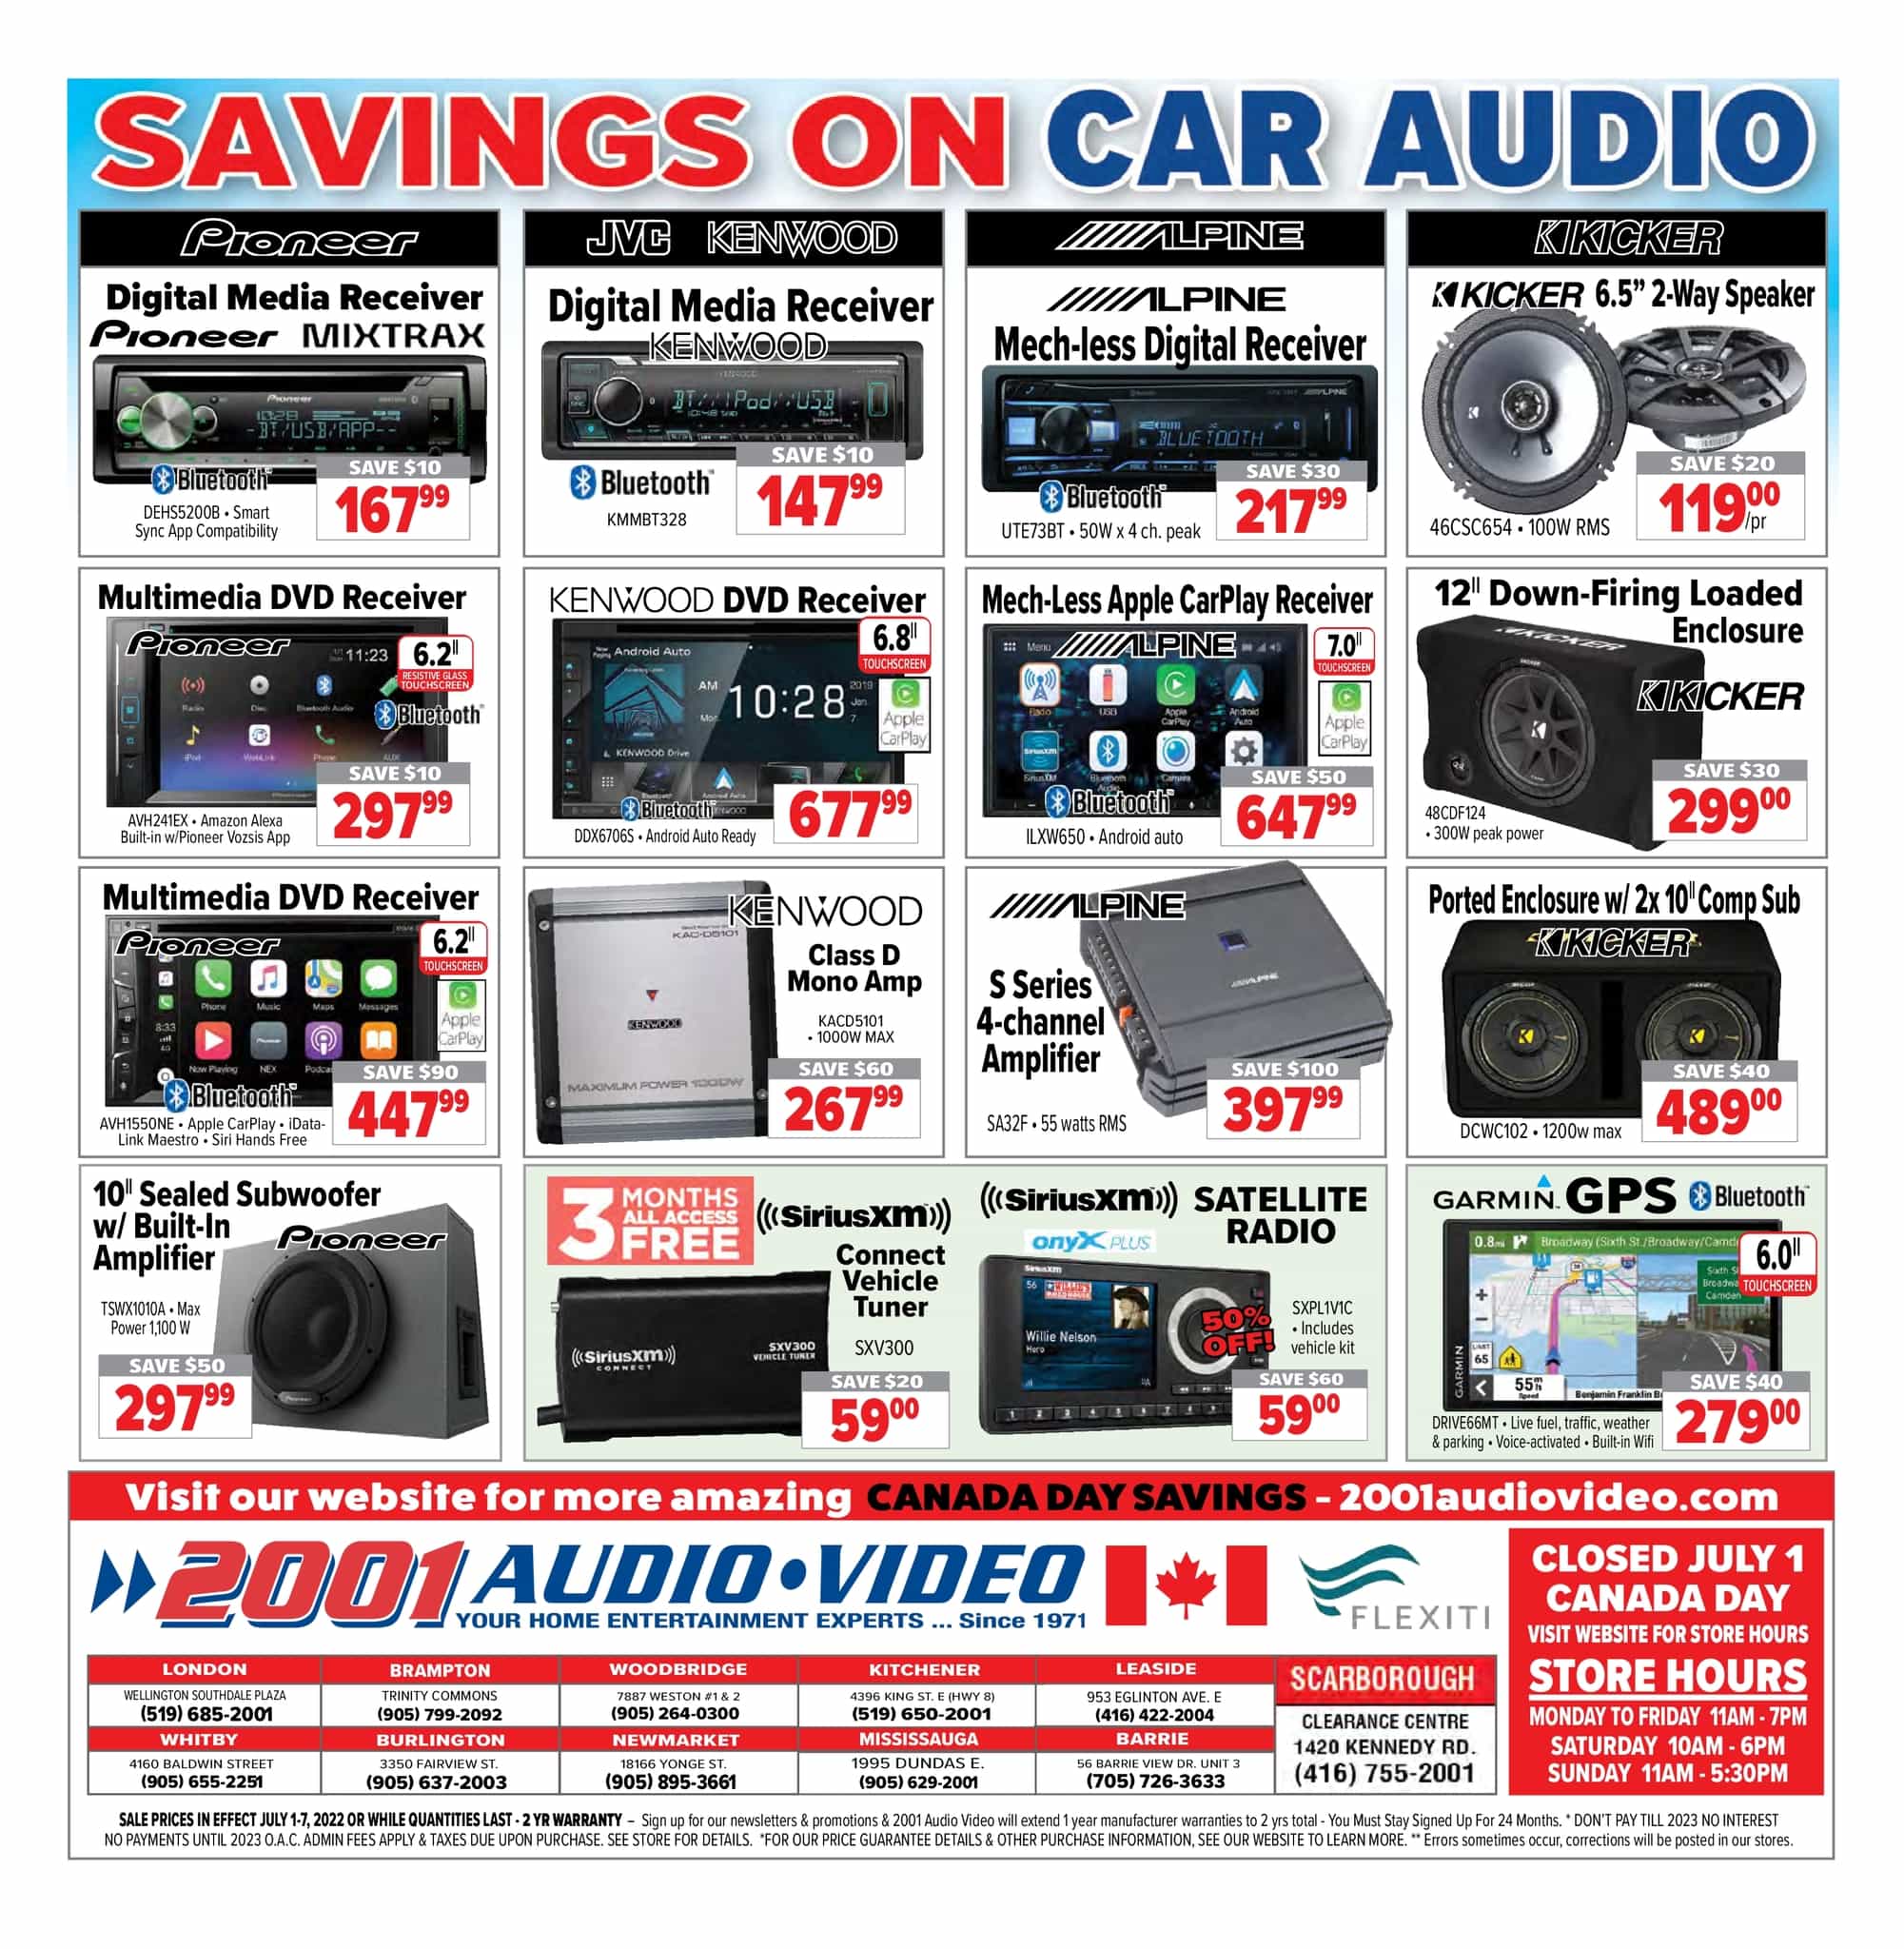 2001 Audio Video - Weekly Flyer Specials - Page 15